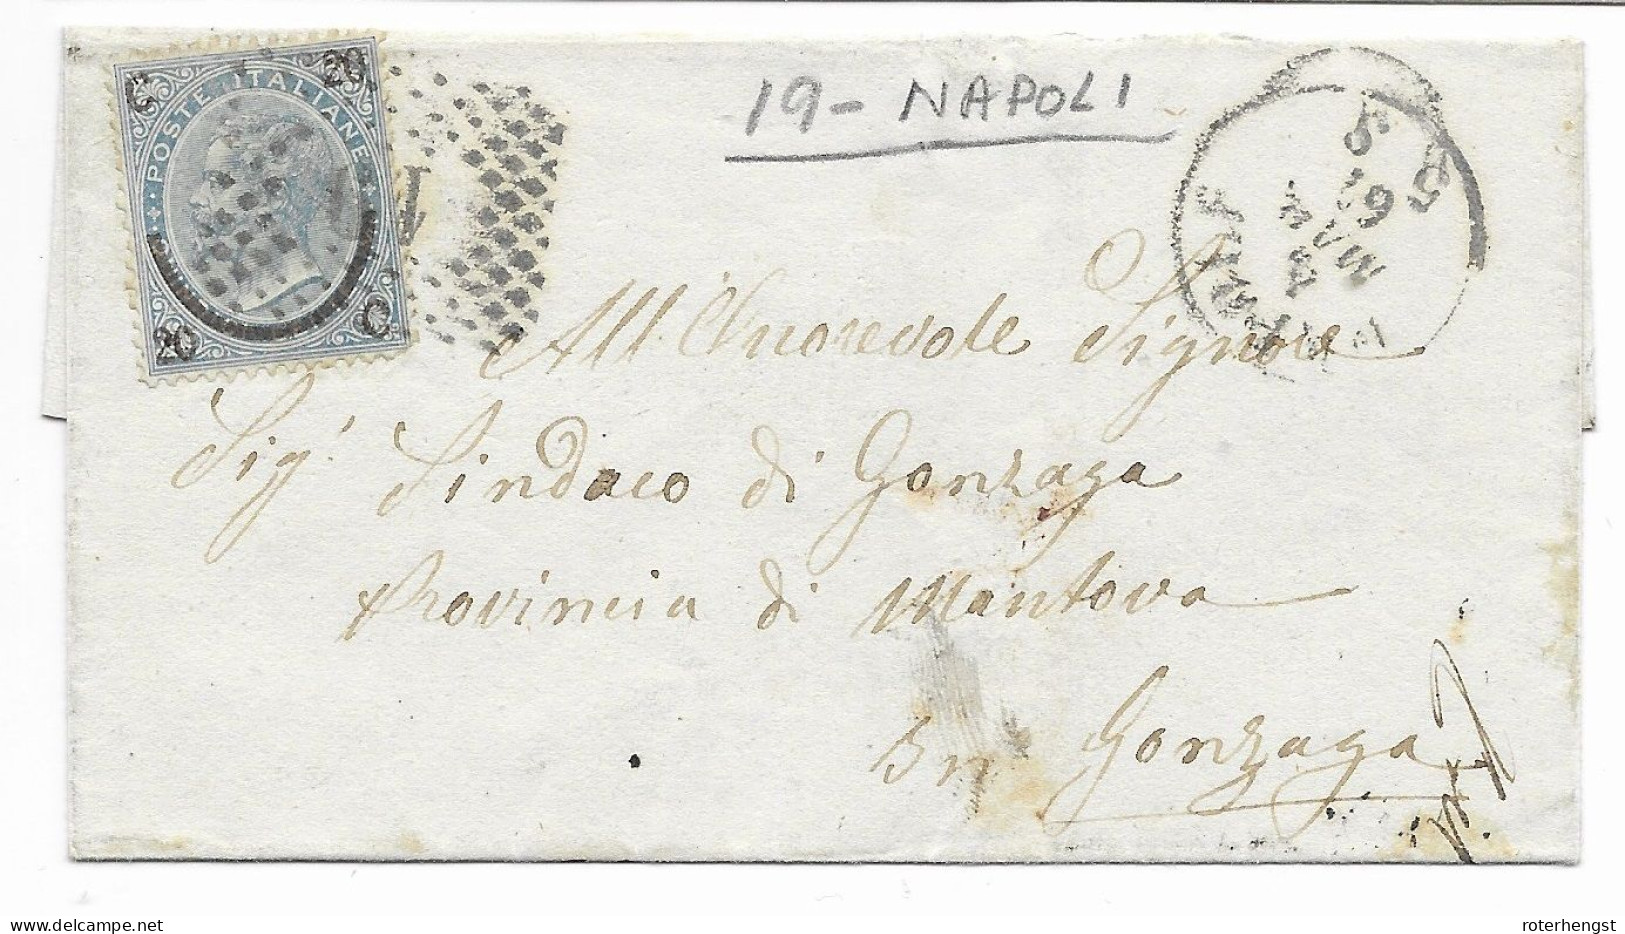 Italy Napoli Letter 1867 Good Michel Type II (stamp Alone 15 Euros) - Mint/hinged